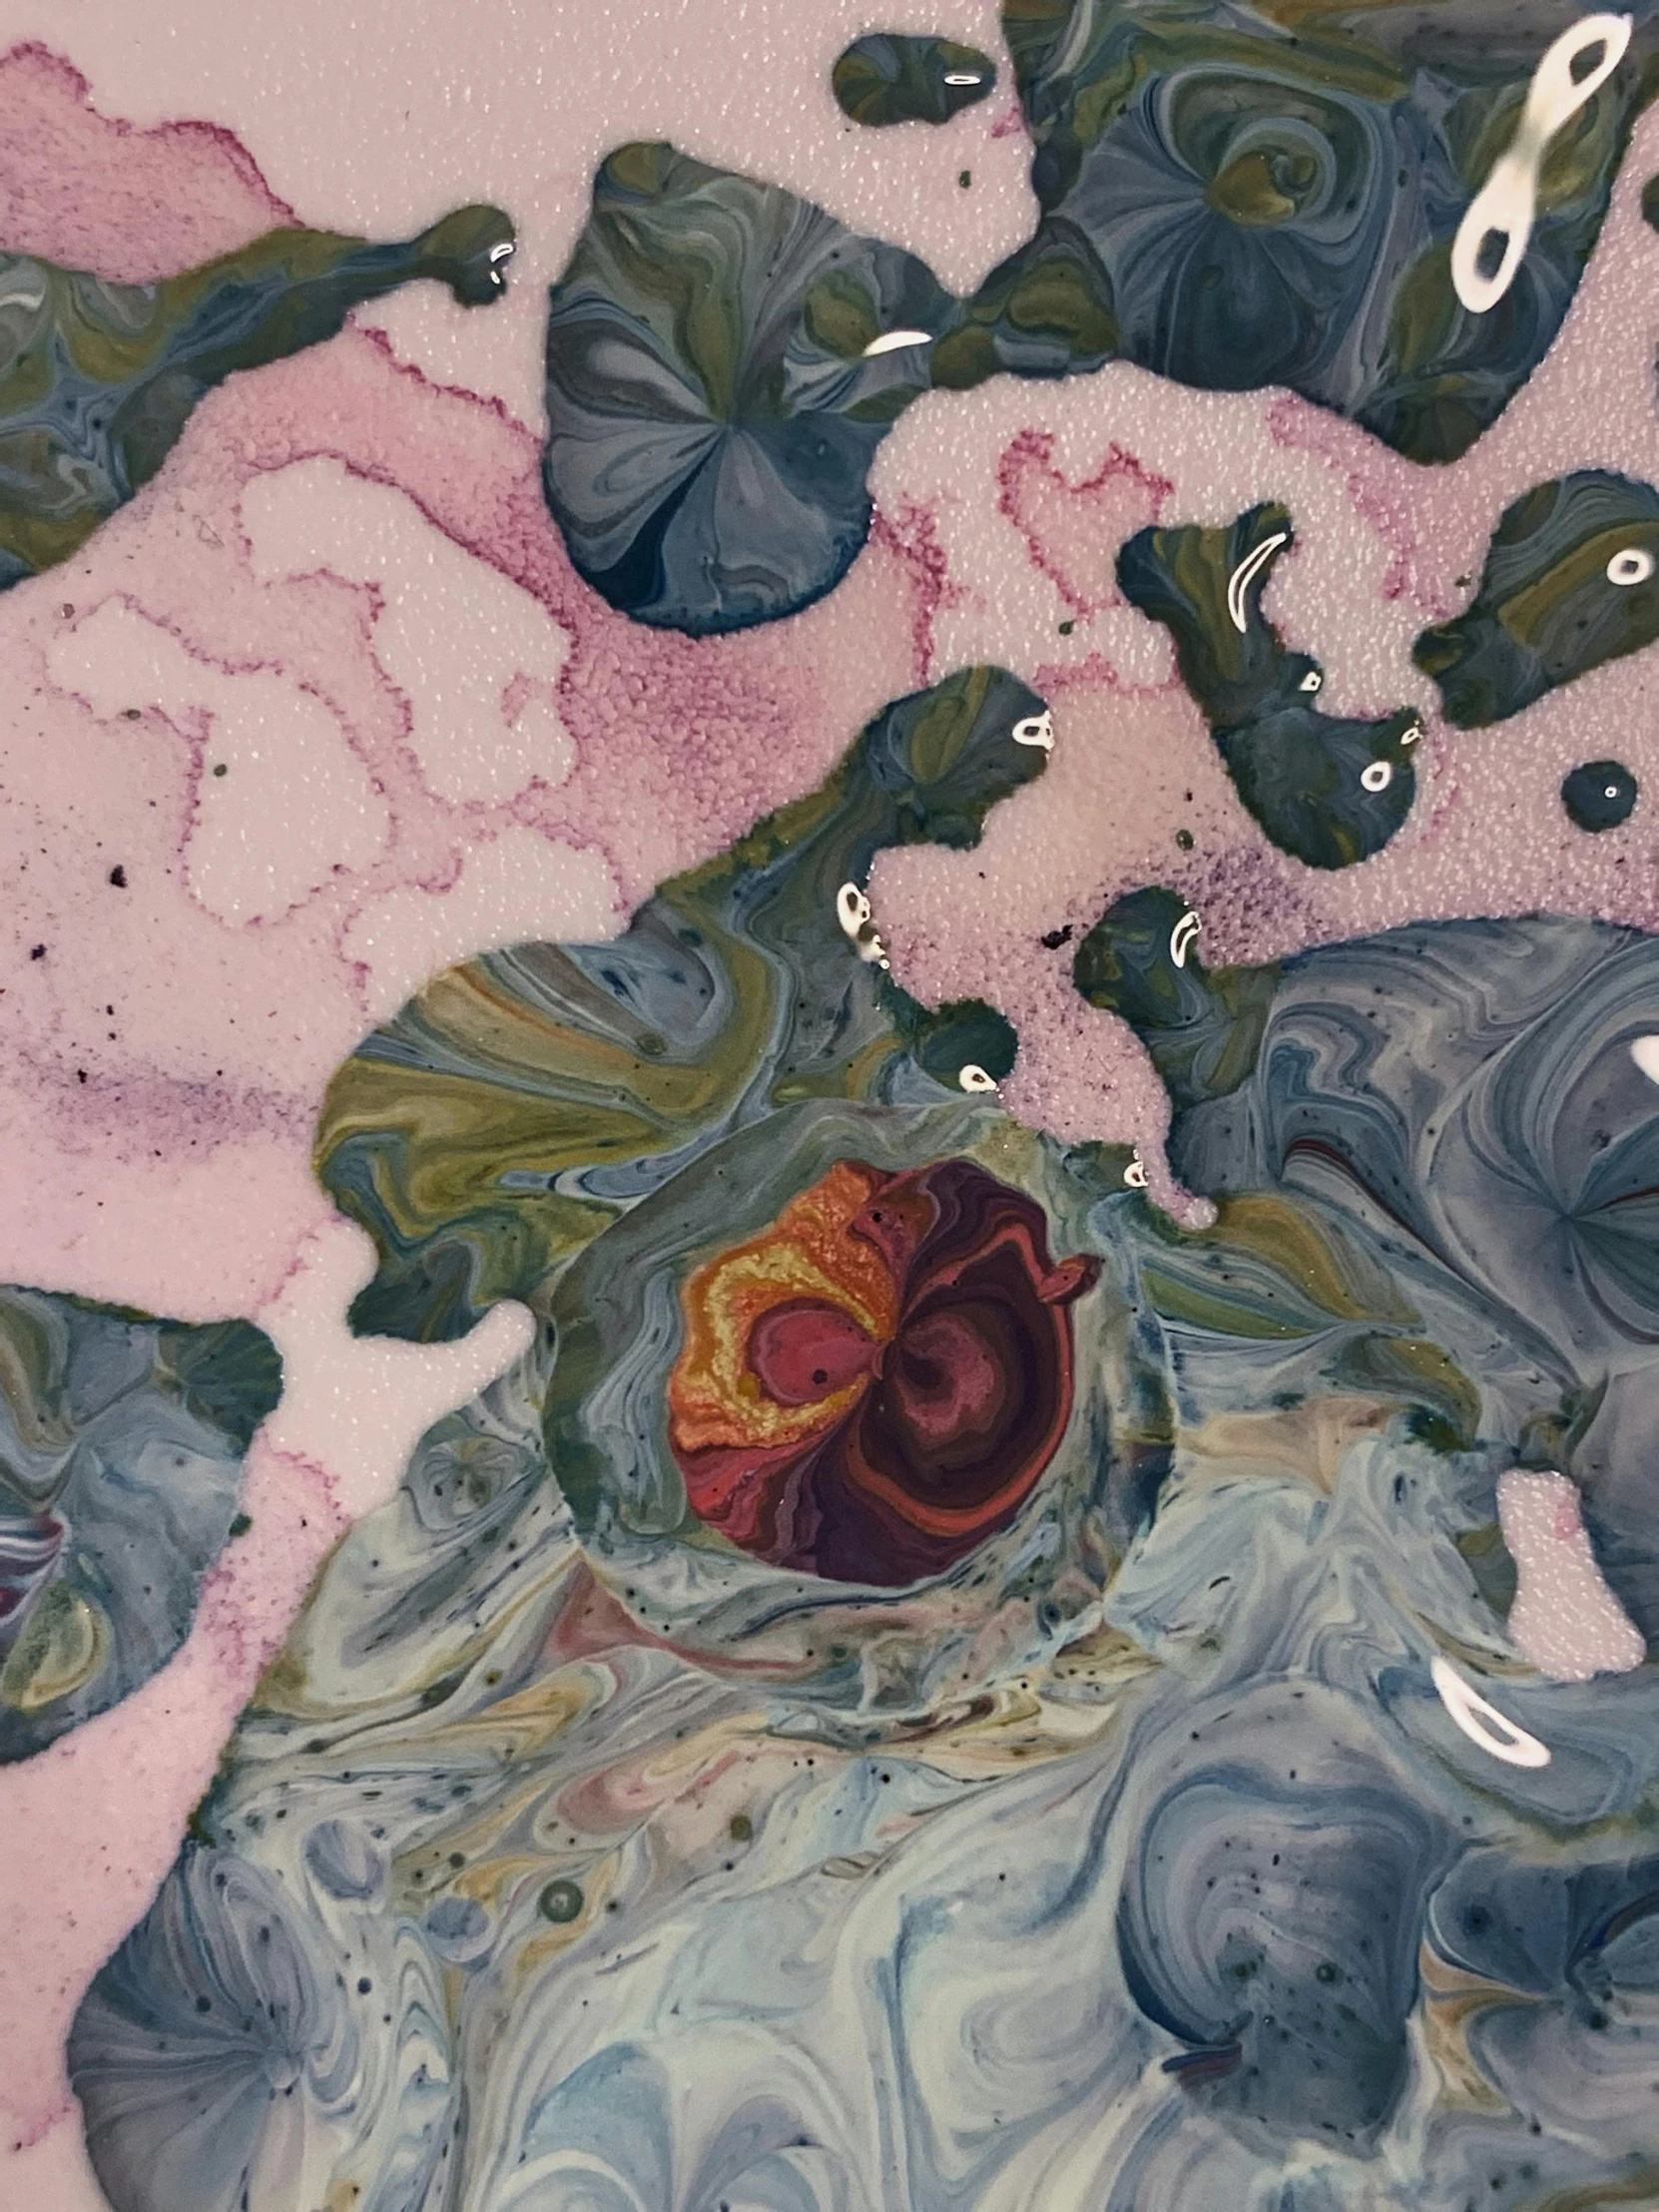 a close up of a piece of art on a table, inspired by Shōzō Shimamoto, unsplash, metaphysical painting, organic ceramic fractal forms, “ femme on a galactic shore, vortex of plum petals, in muted colors